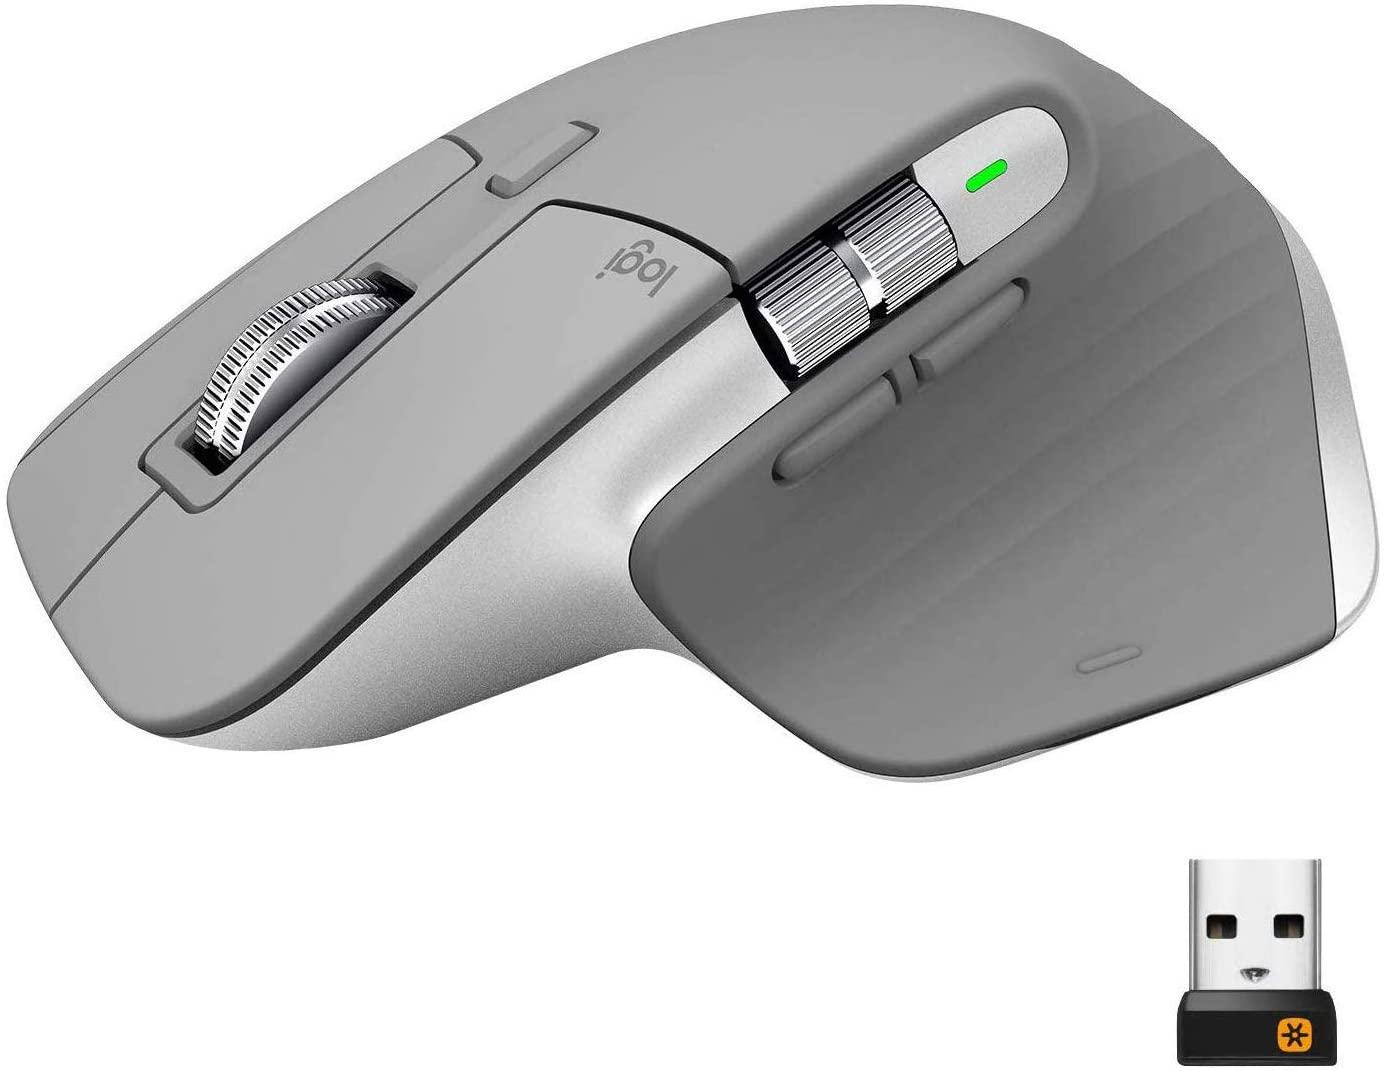 Logitech MX Master 3 Advanced Wireless Mouse for $89.99 Shipped